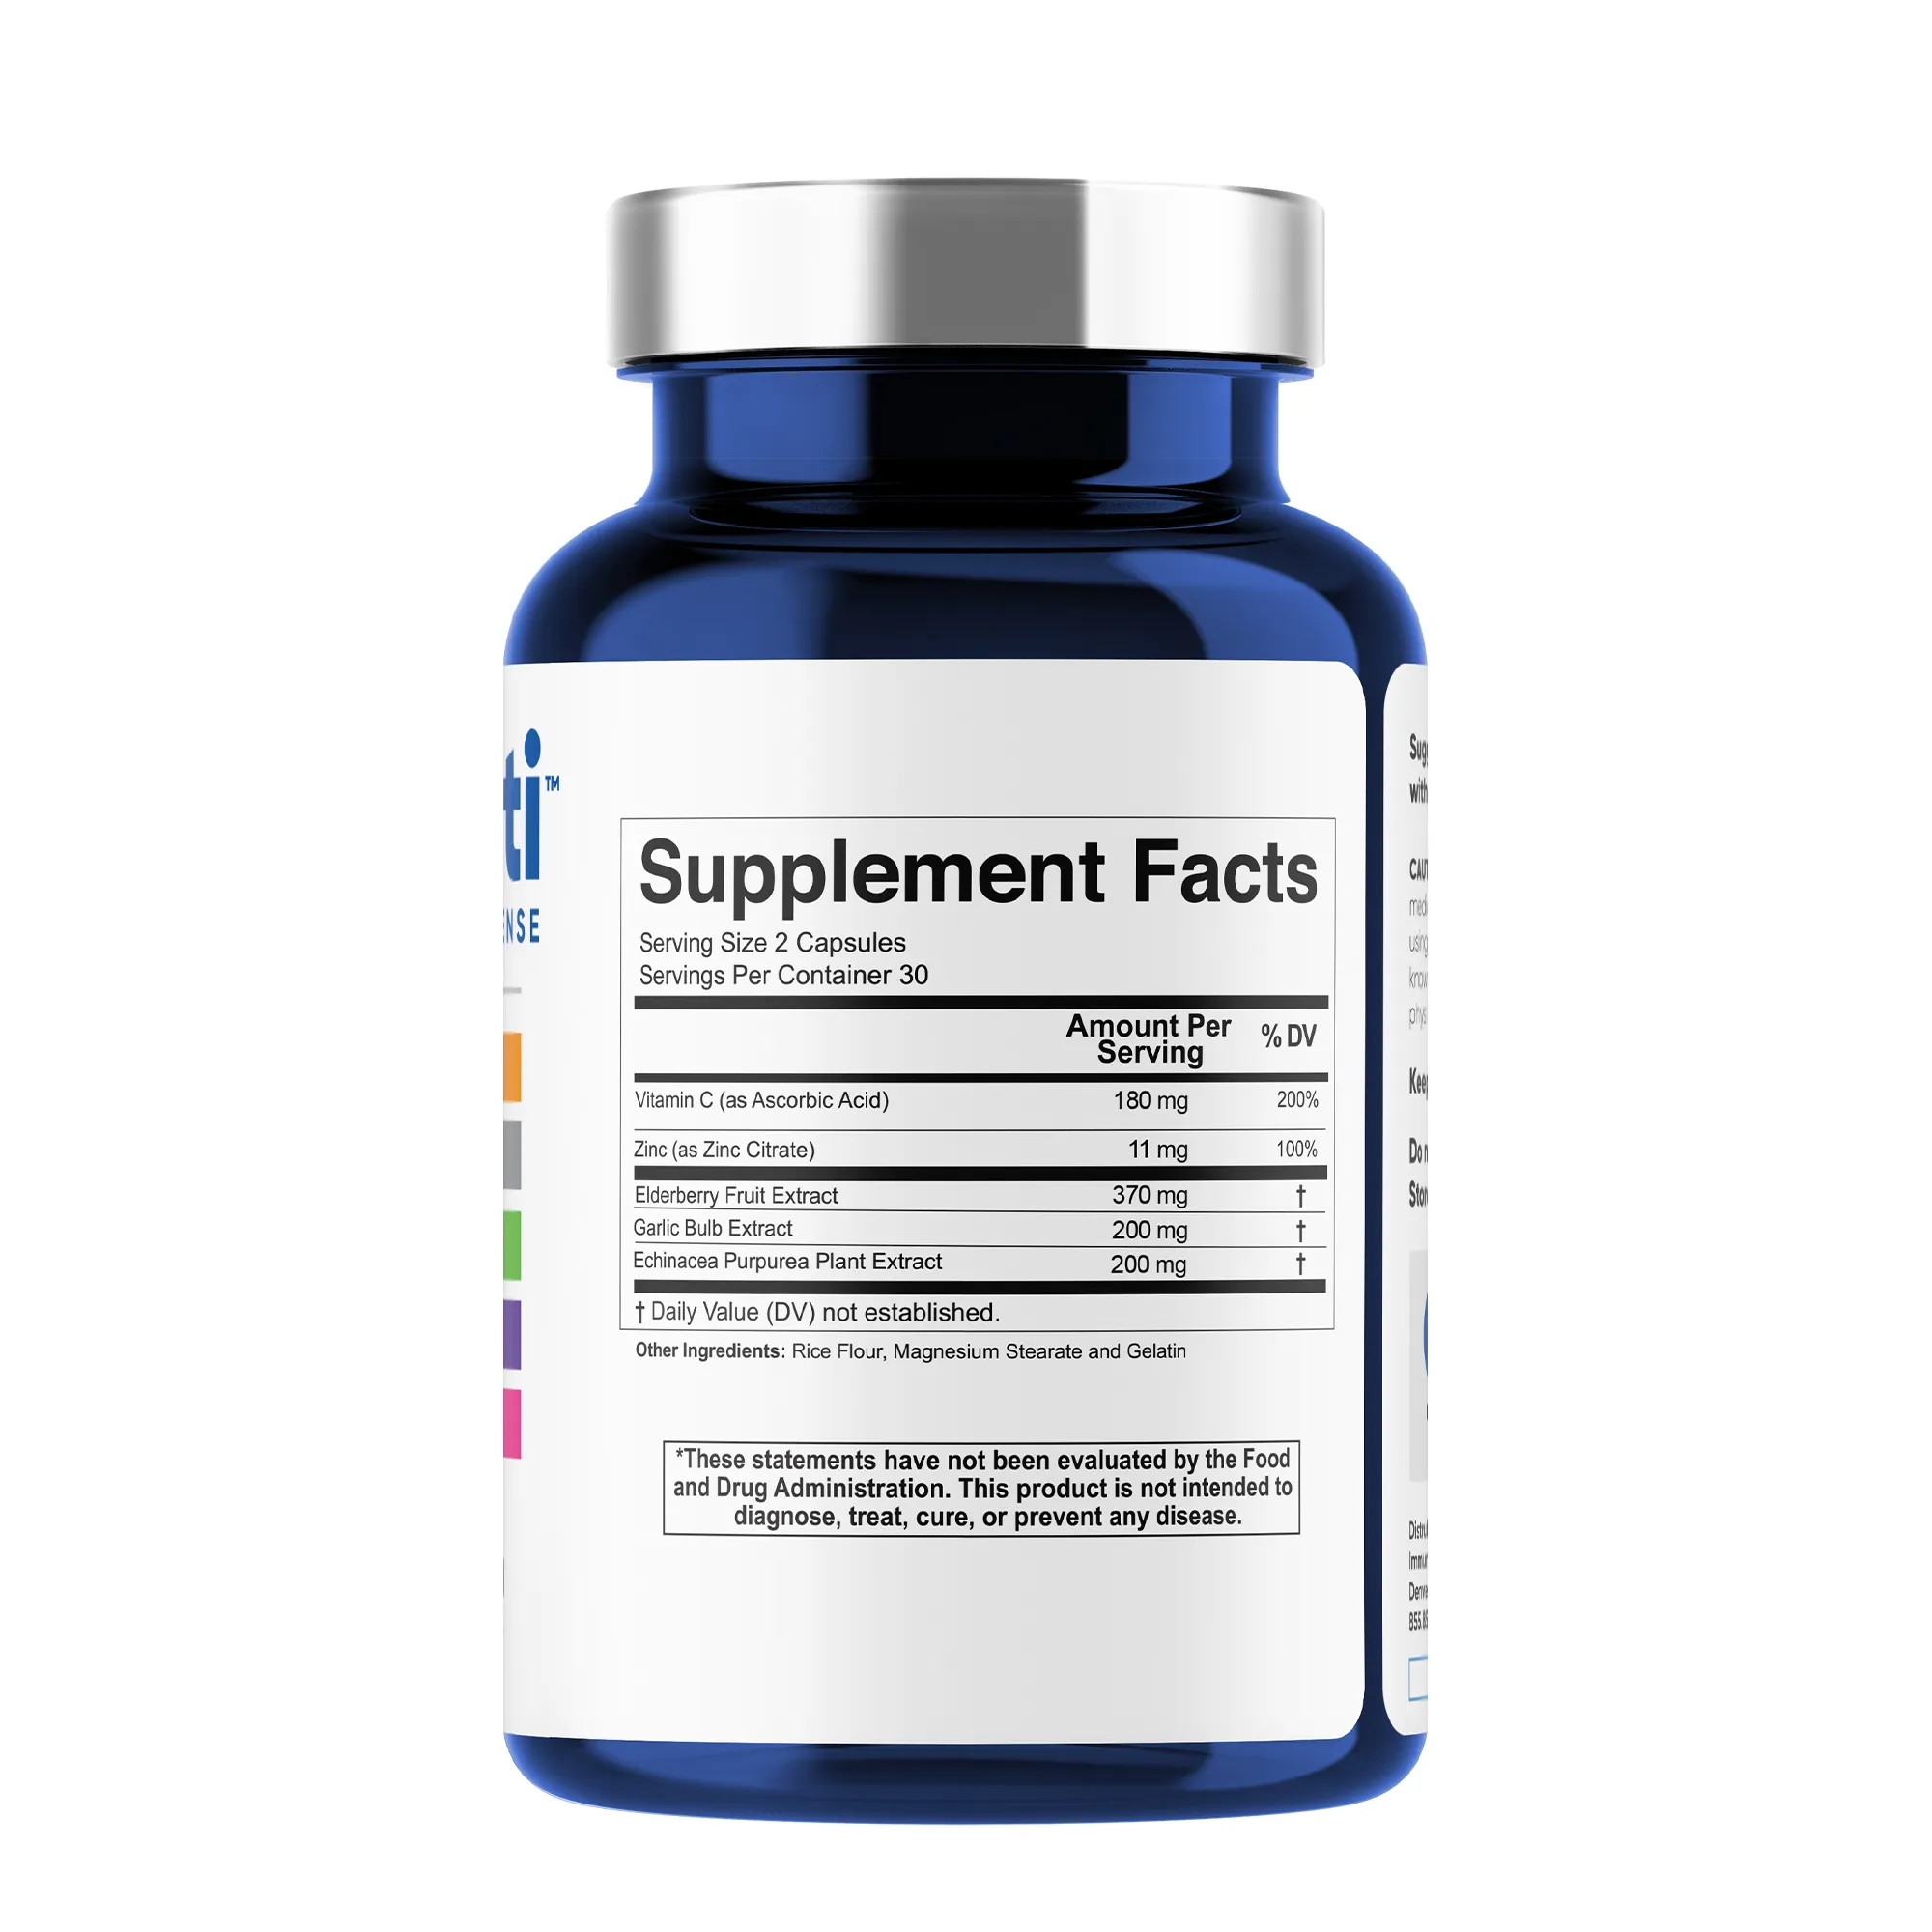 Immuneti advance immune defense bottle's supplement facts side angle view